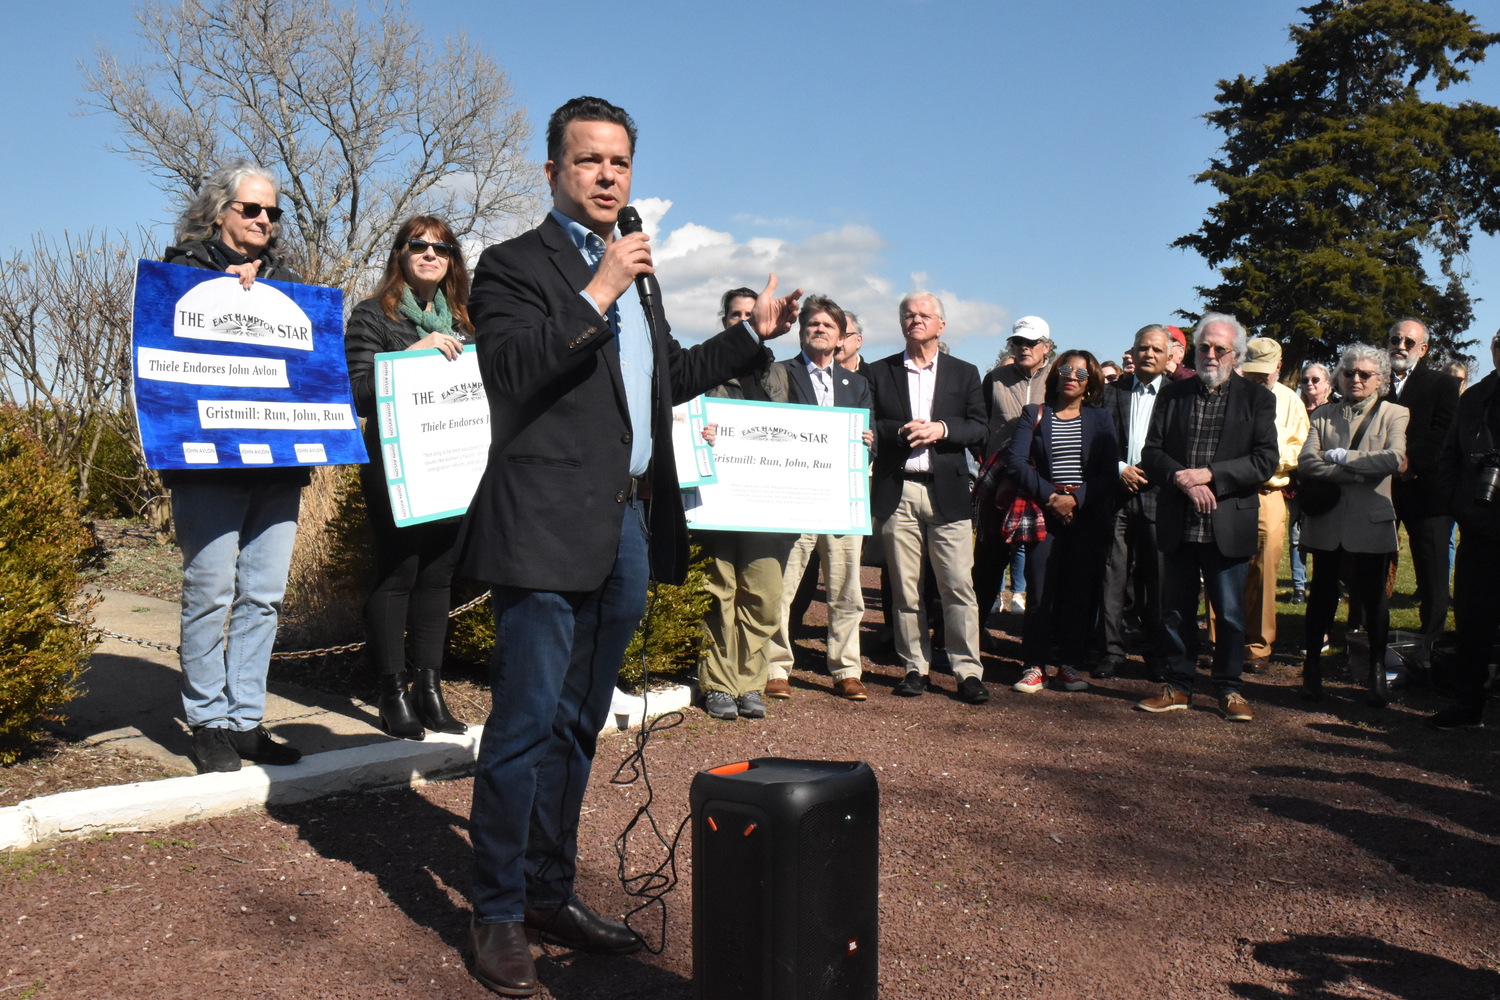 Former CNN anchor and author John Avlon kicked off his congressional campaign with a rally in Marine Park in Sag Harbor on Saturday. STEPHEN J. KOTZ